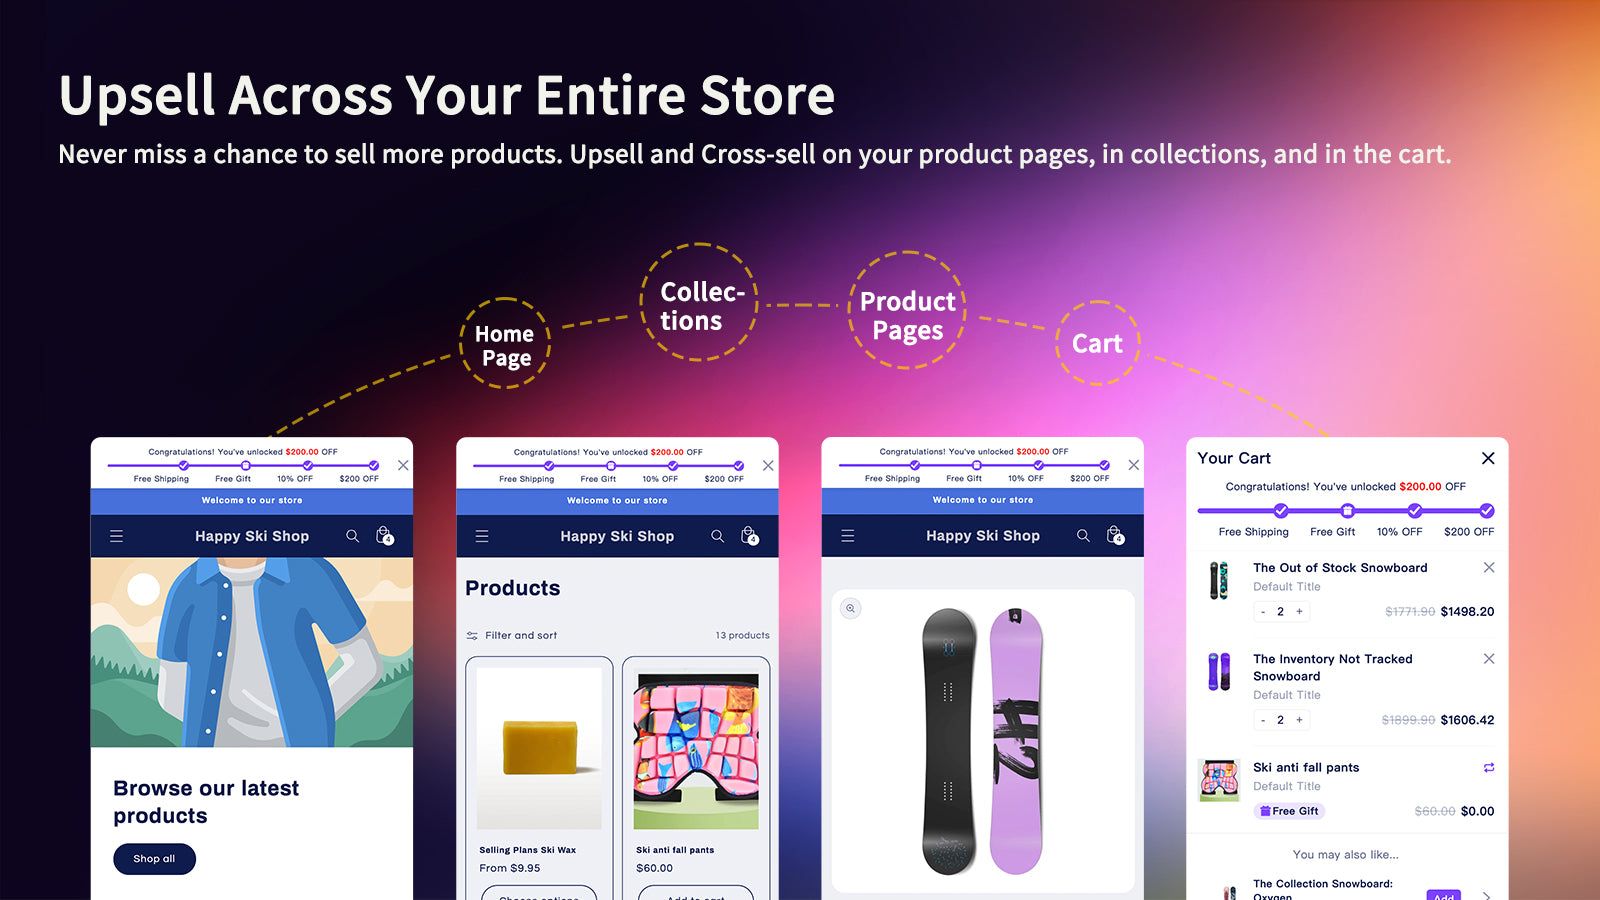 Upsell and Cross-sell on product pages, collections & the cart